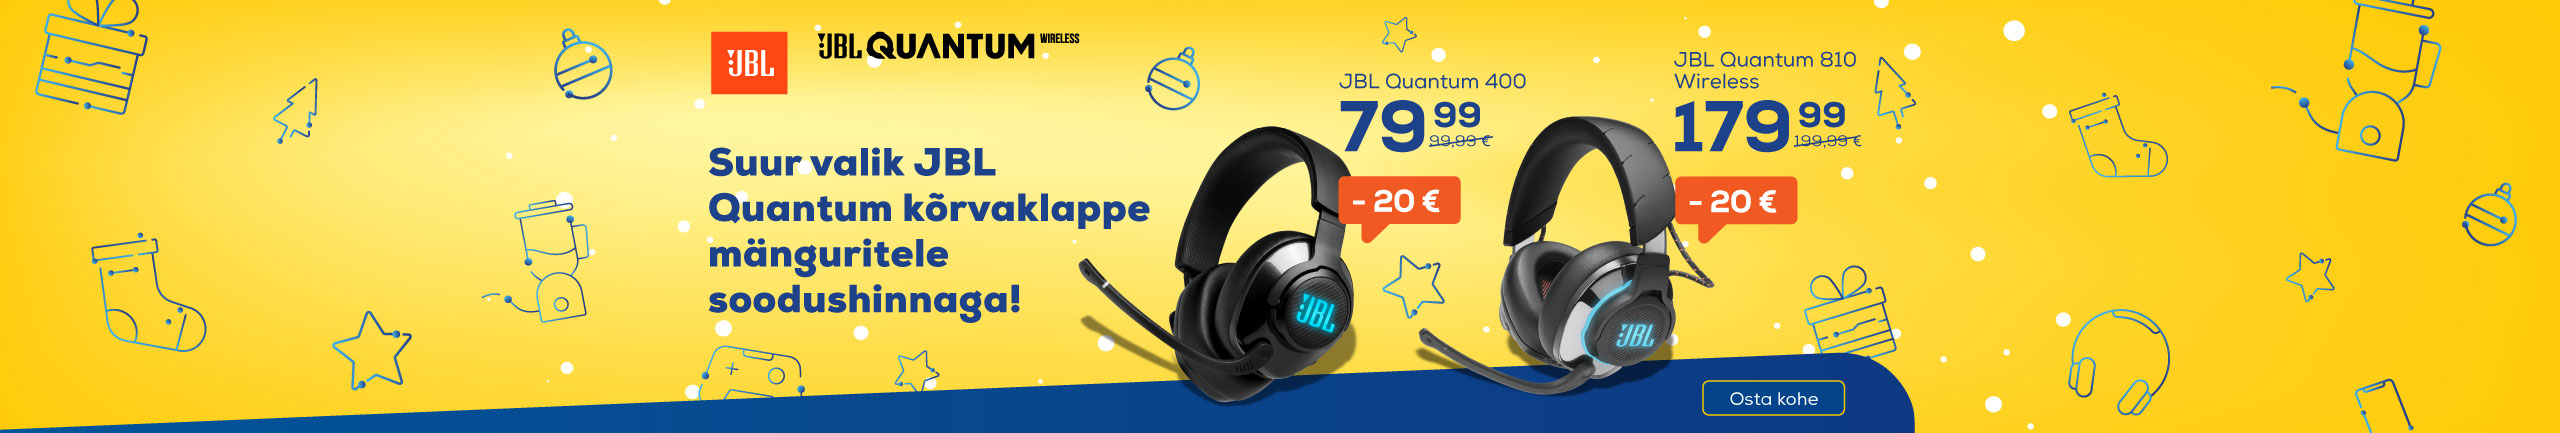 Great selection of JBL Quantum gaming headsets!